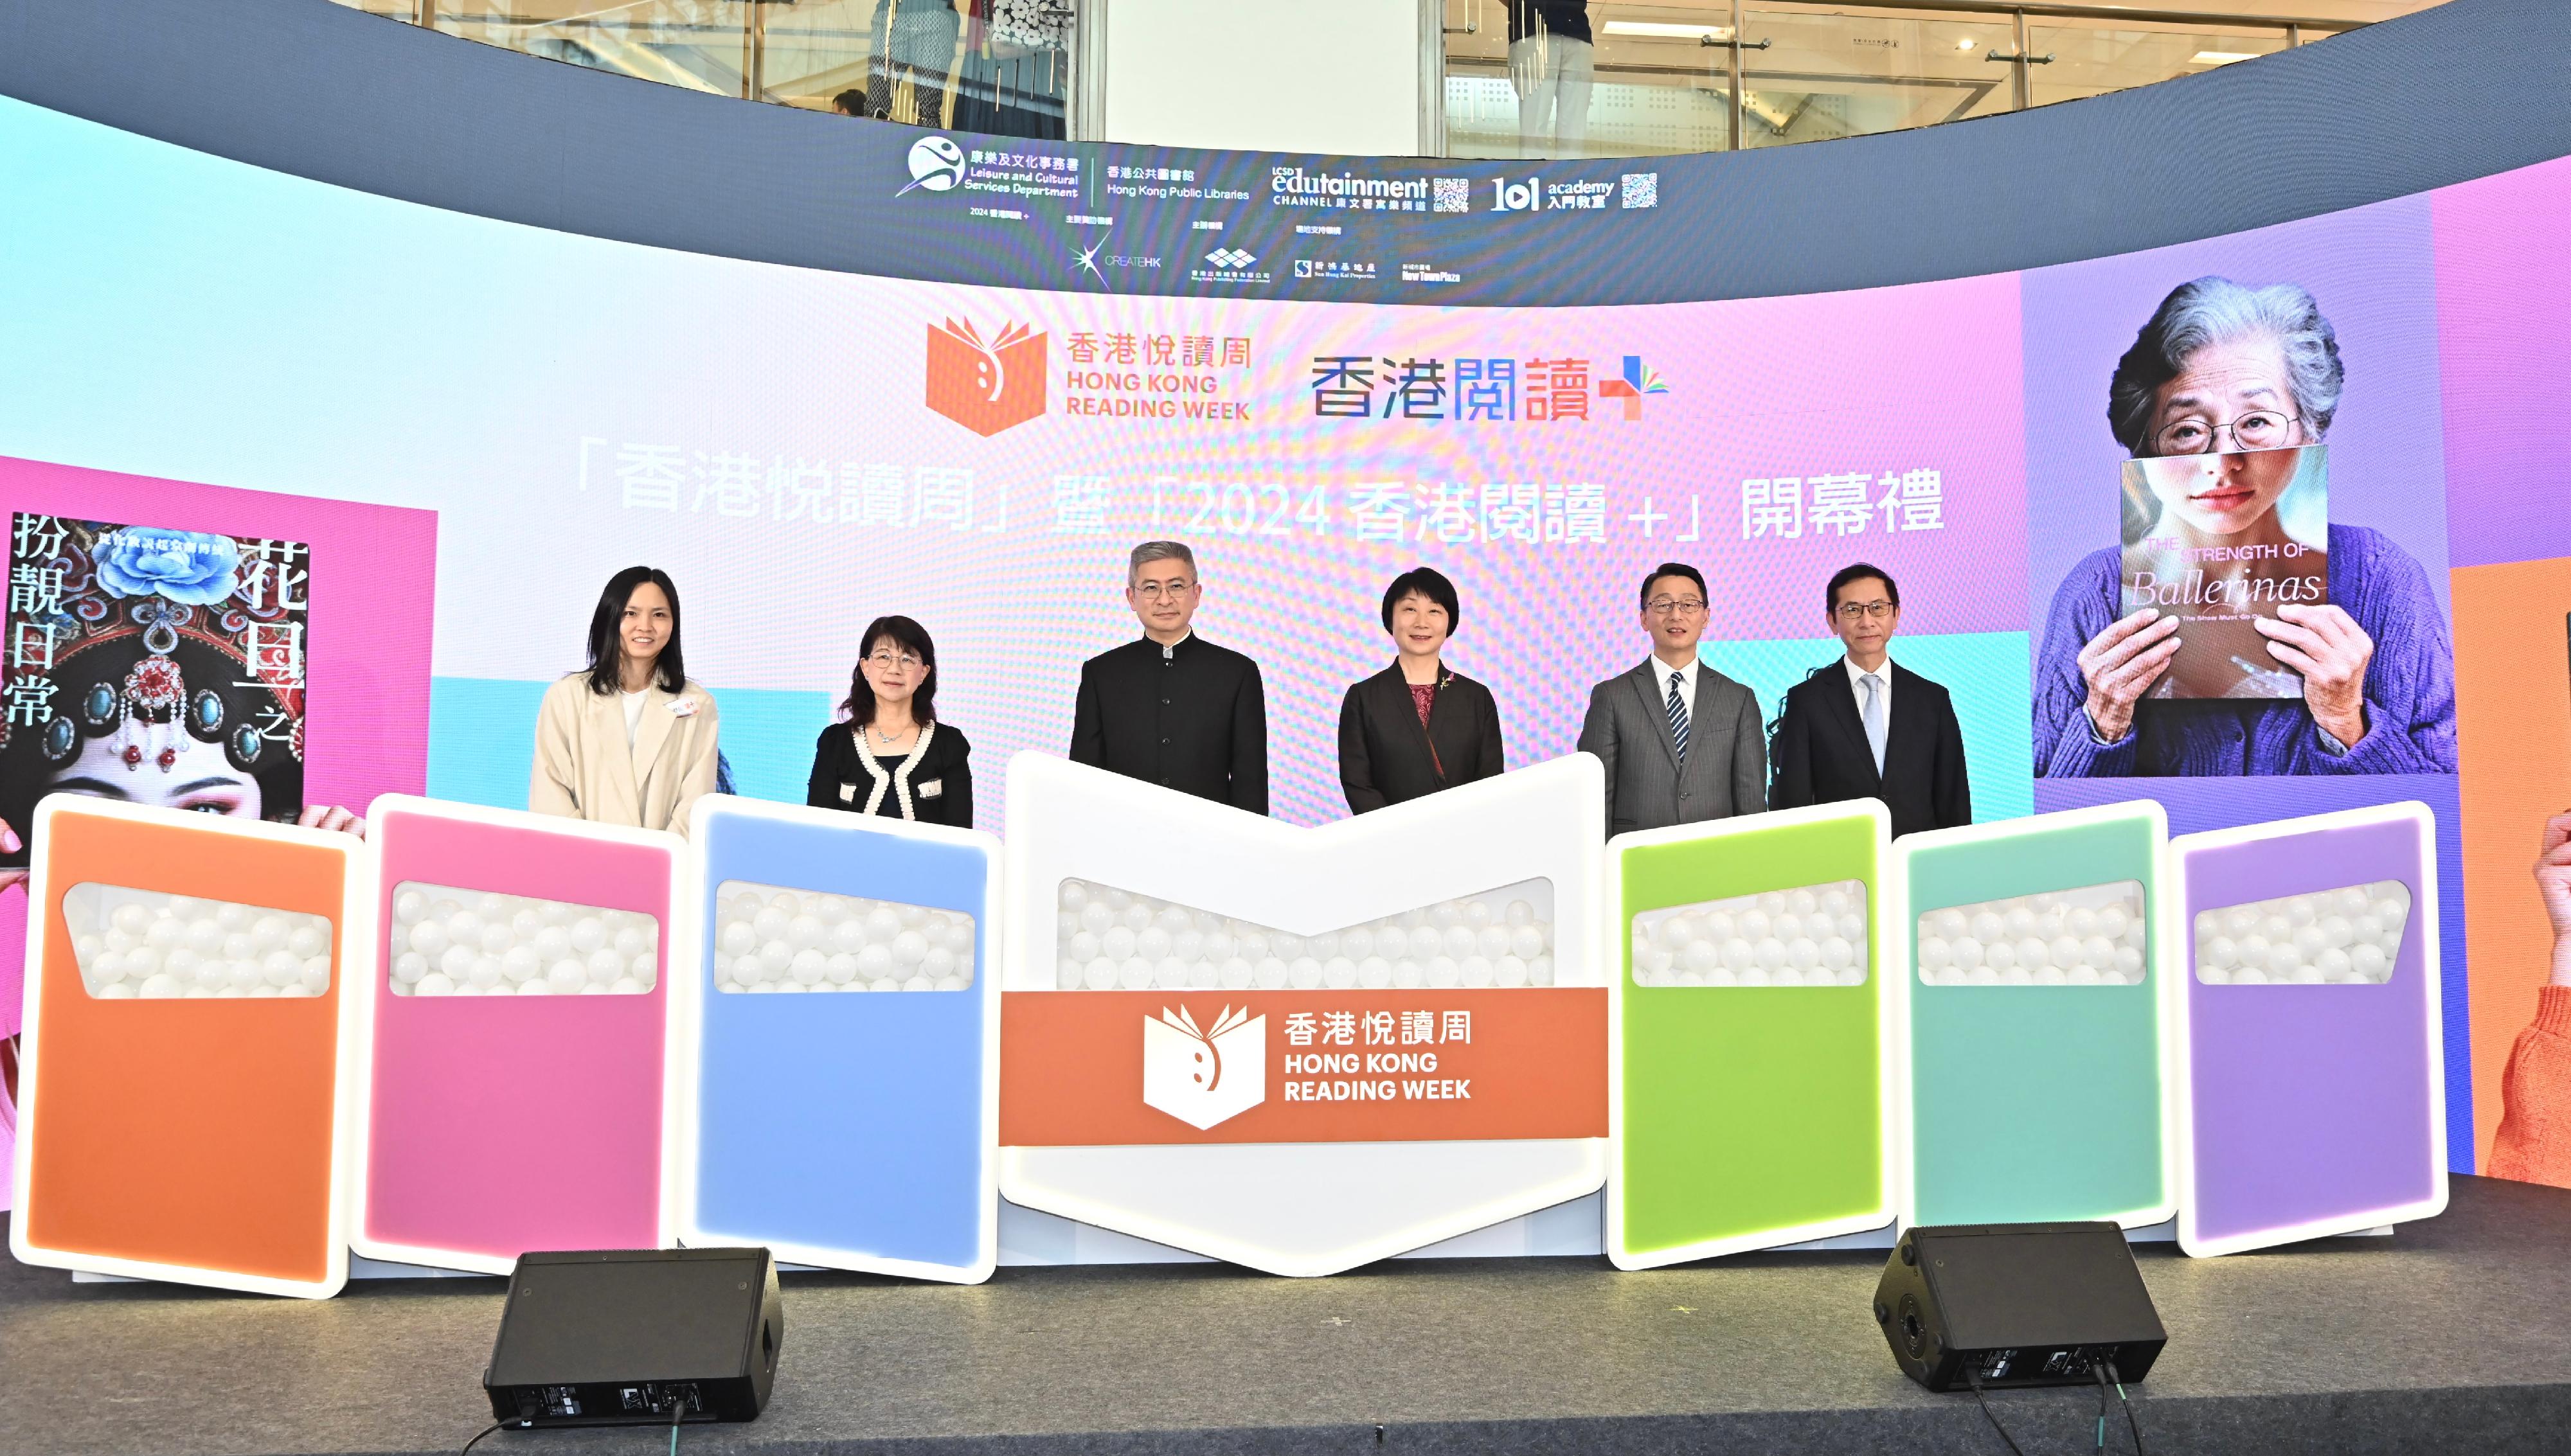 The Hong Kong Public Libraries of the Leisure and Cultural Services Department and the Hong Kong Publishing Federation (HKPF) today (April 20) jointly held the opening ceremony of Hong Kong Reading Week and the 2024 Hong Kong Reading+ at New Town Plaza in Sha Tin. Photo shows officiating guests including the Acting Secretary for Culture, Sports and Tourism, Mr Raistlin Lau (third left); member of the Standing Committee and the Head of the Publicity Department of CPC Shenzhen Municipal Committee, Ms Zhang Ling (third right); the Director of Leisure and Cultural Services, Mr Vincent Liu (second right); the Acting Head of Create Hong Kong, Mrs Lowell Cho (second left); the Deputy Director of Broadcasting, Ms Christine Wai (first left); and the President of the HKPF, Dr Elvin Lee (first right).